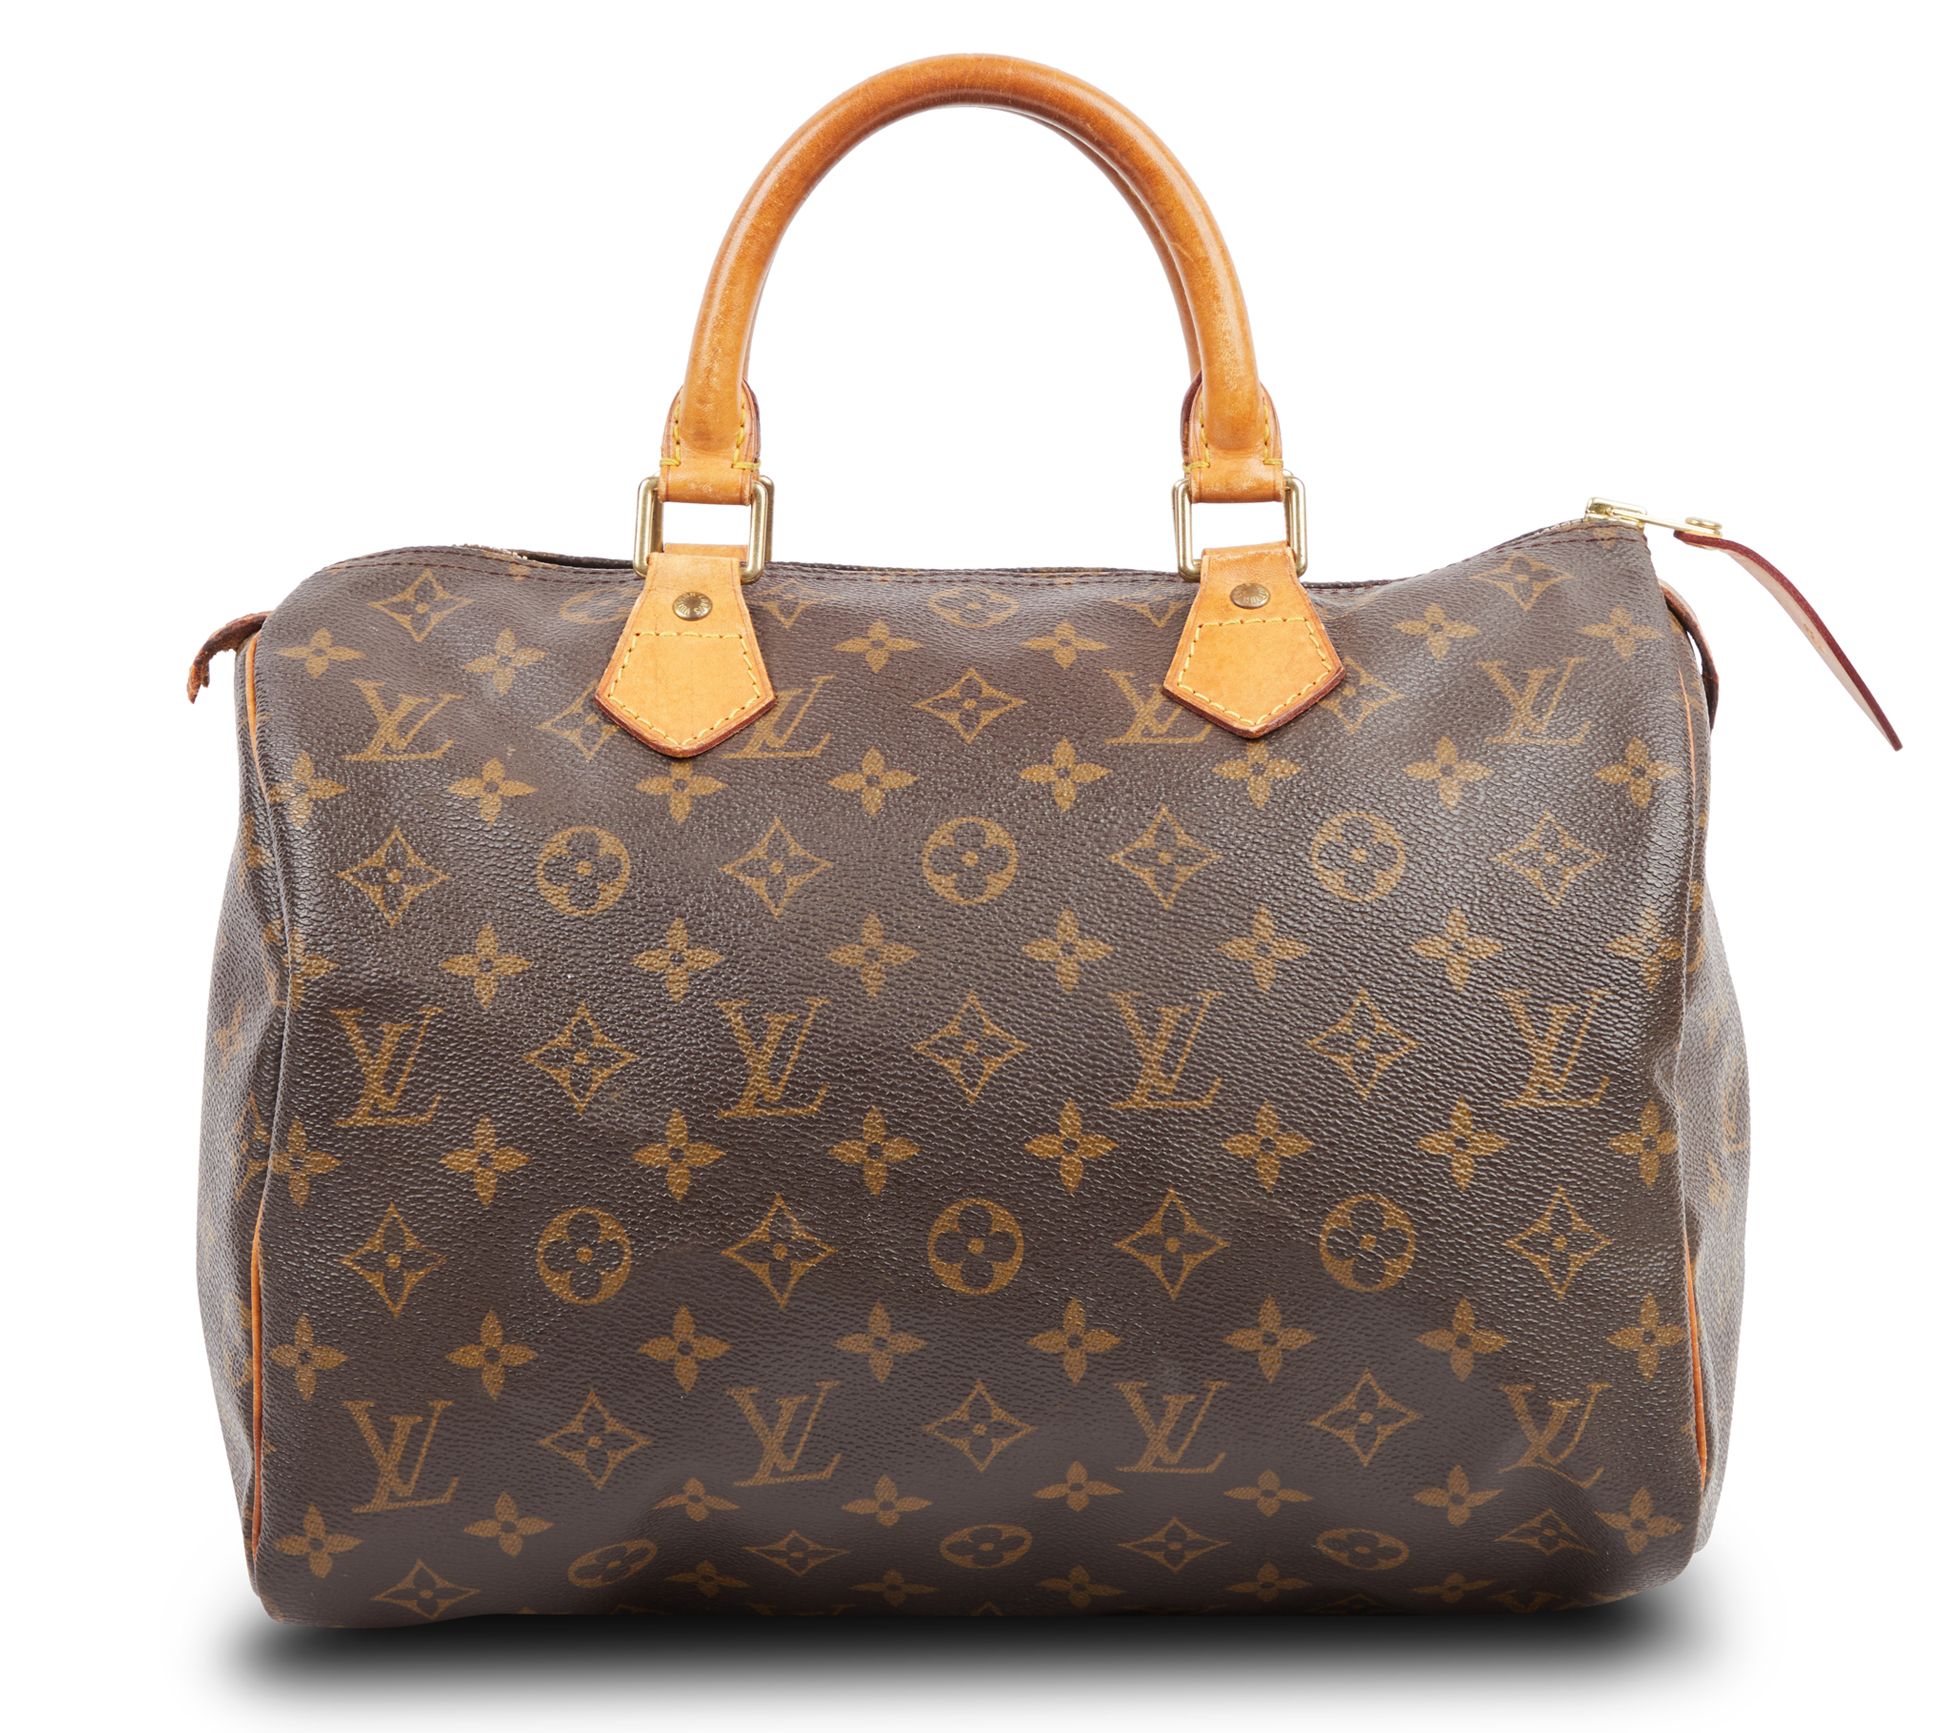 Louis Vuitton lv woman small backpack Damier ebene  Louis vuitton handbags  crossbody, Louis vuitton handbags speedy, Louis vuitton handbags